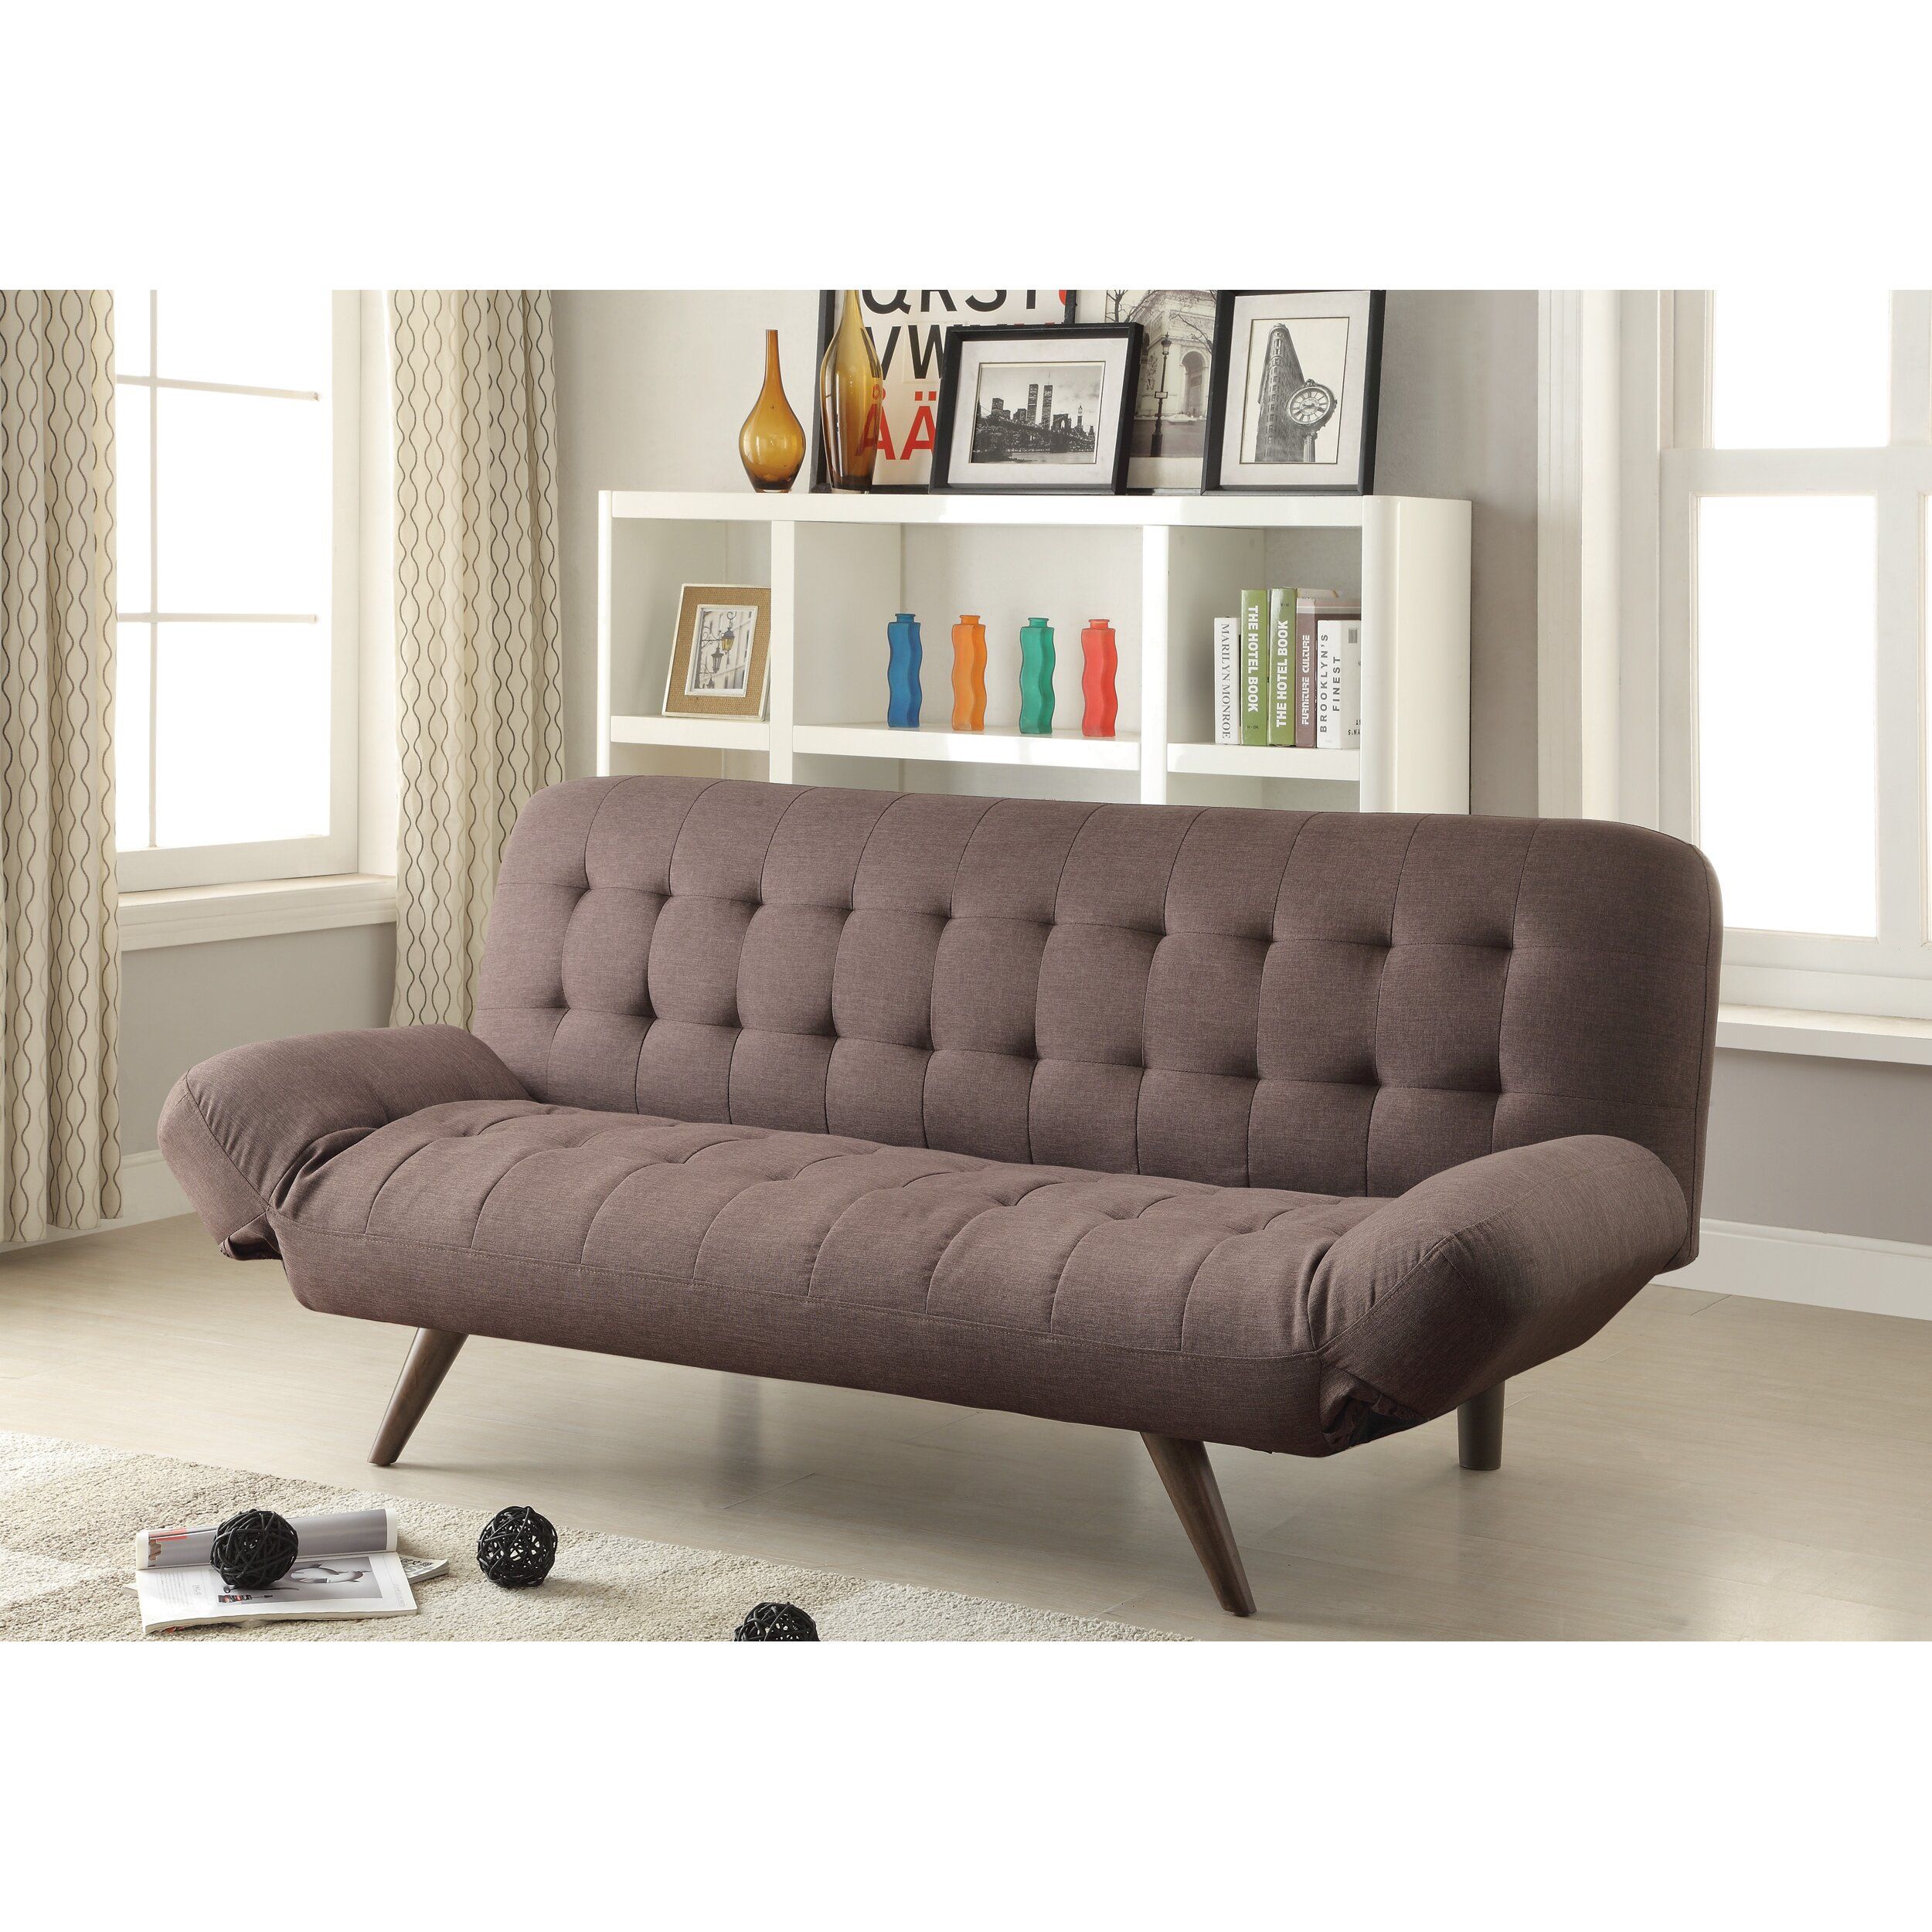 Wildon Home ® Tufted Convertible Sleeper Sofa In Brown & Reviews | Wayfair For Tufted Convertible Sleeper Sofas (View 5 of 20)